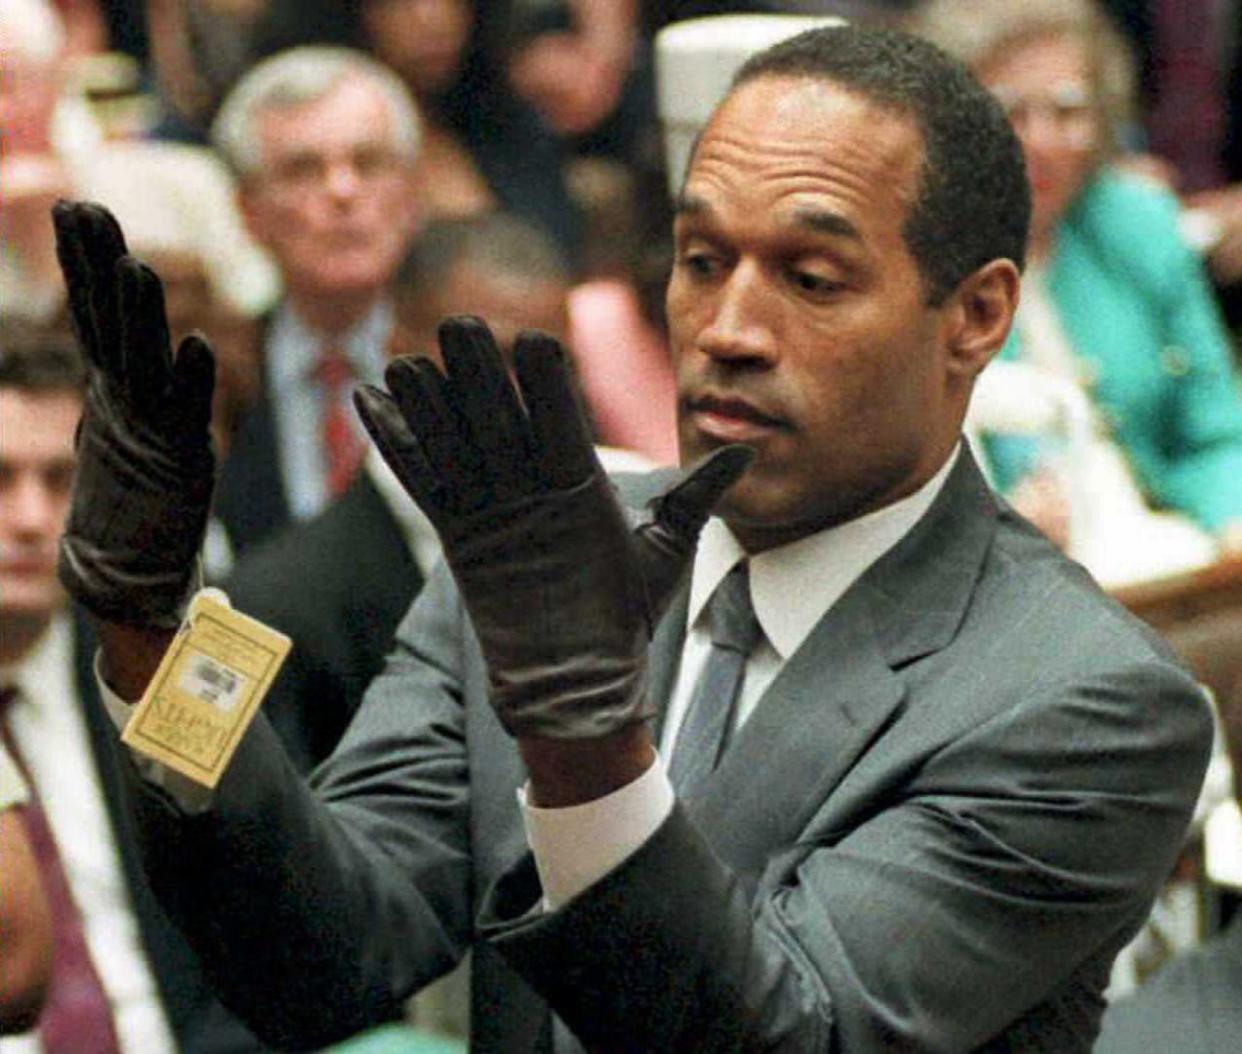 O.J. Simpson during the criminal trial for the deaths of ex-wife Nicole Brown Simpson and her friend Ron Goldman.